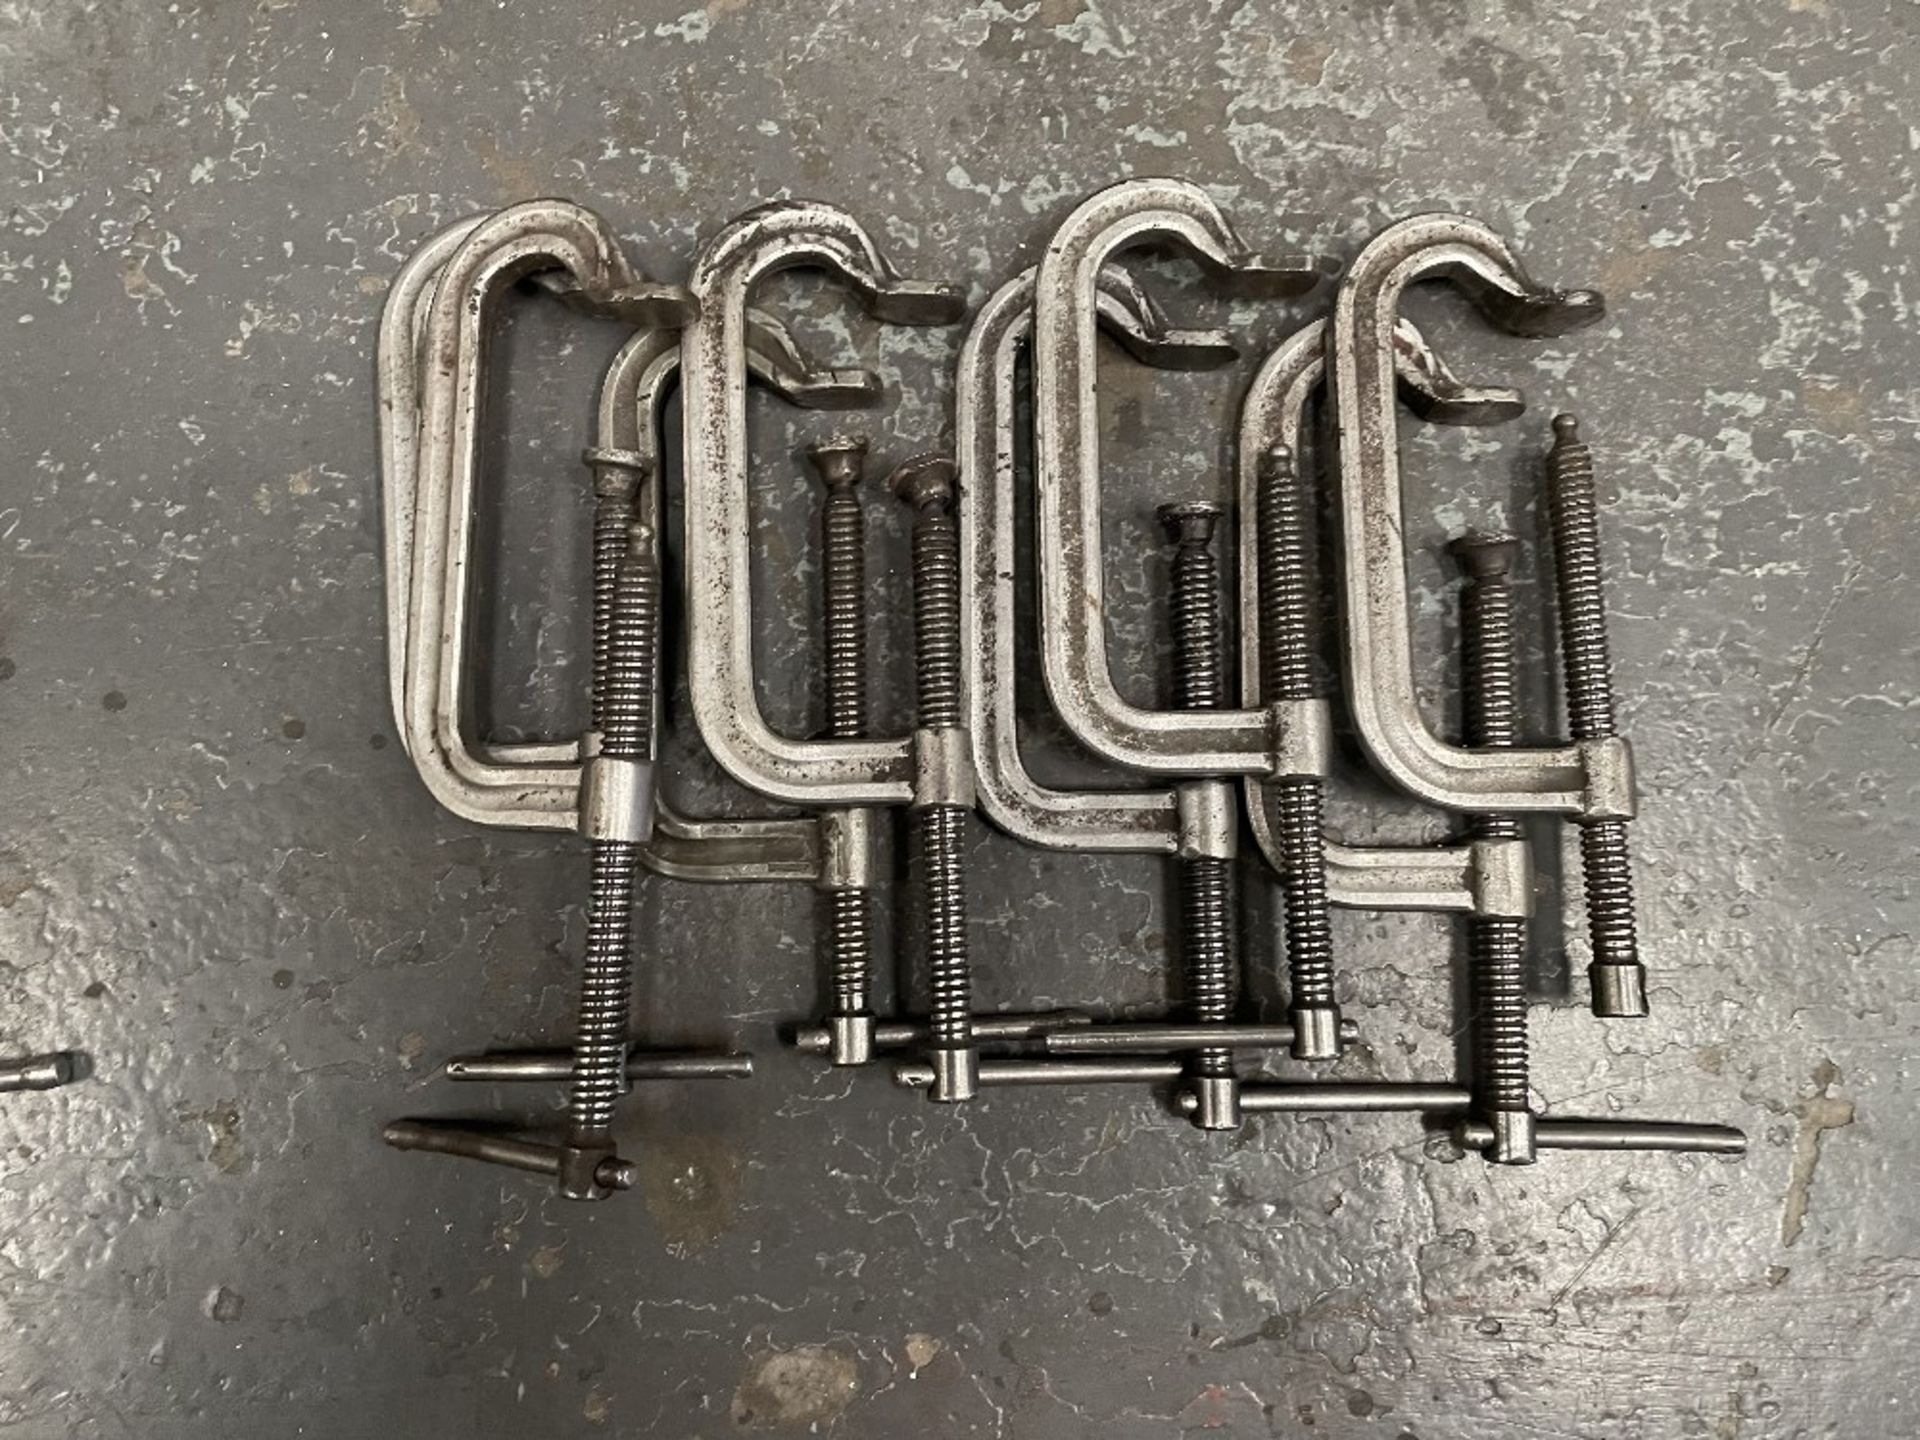 8 x Various 150mm G-Clamps